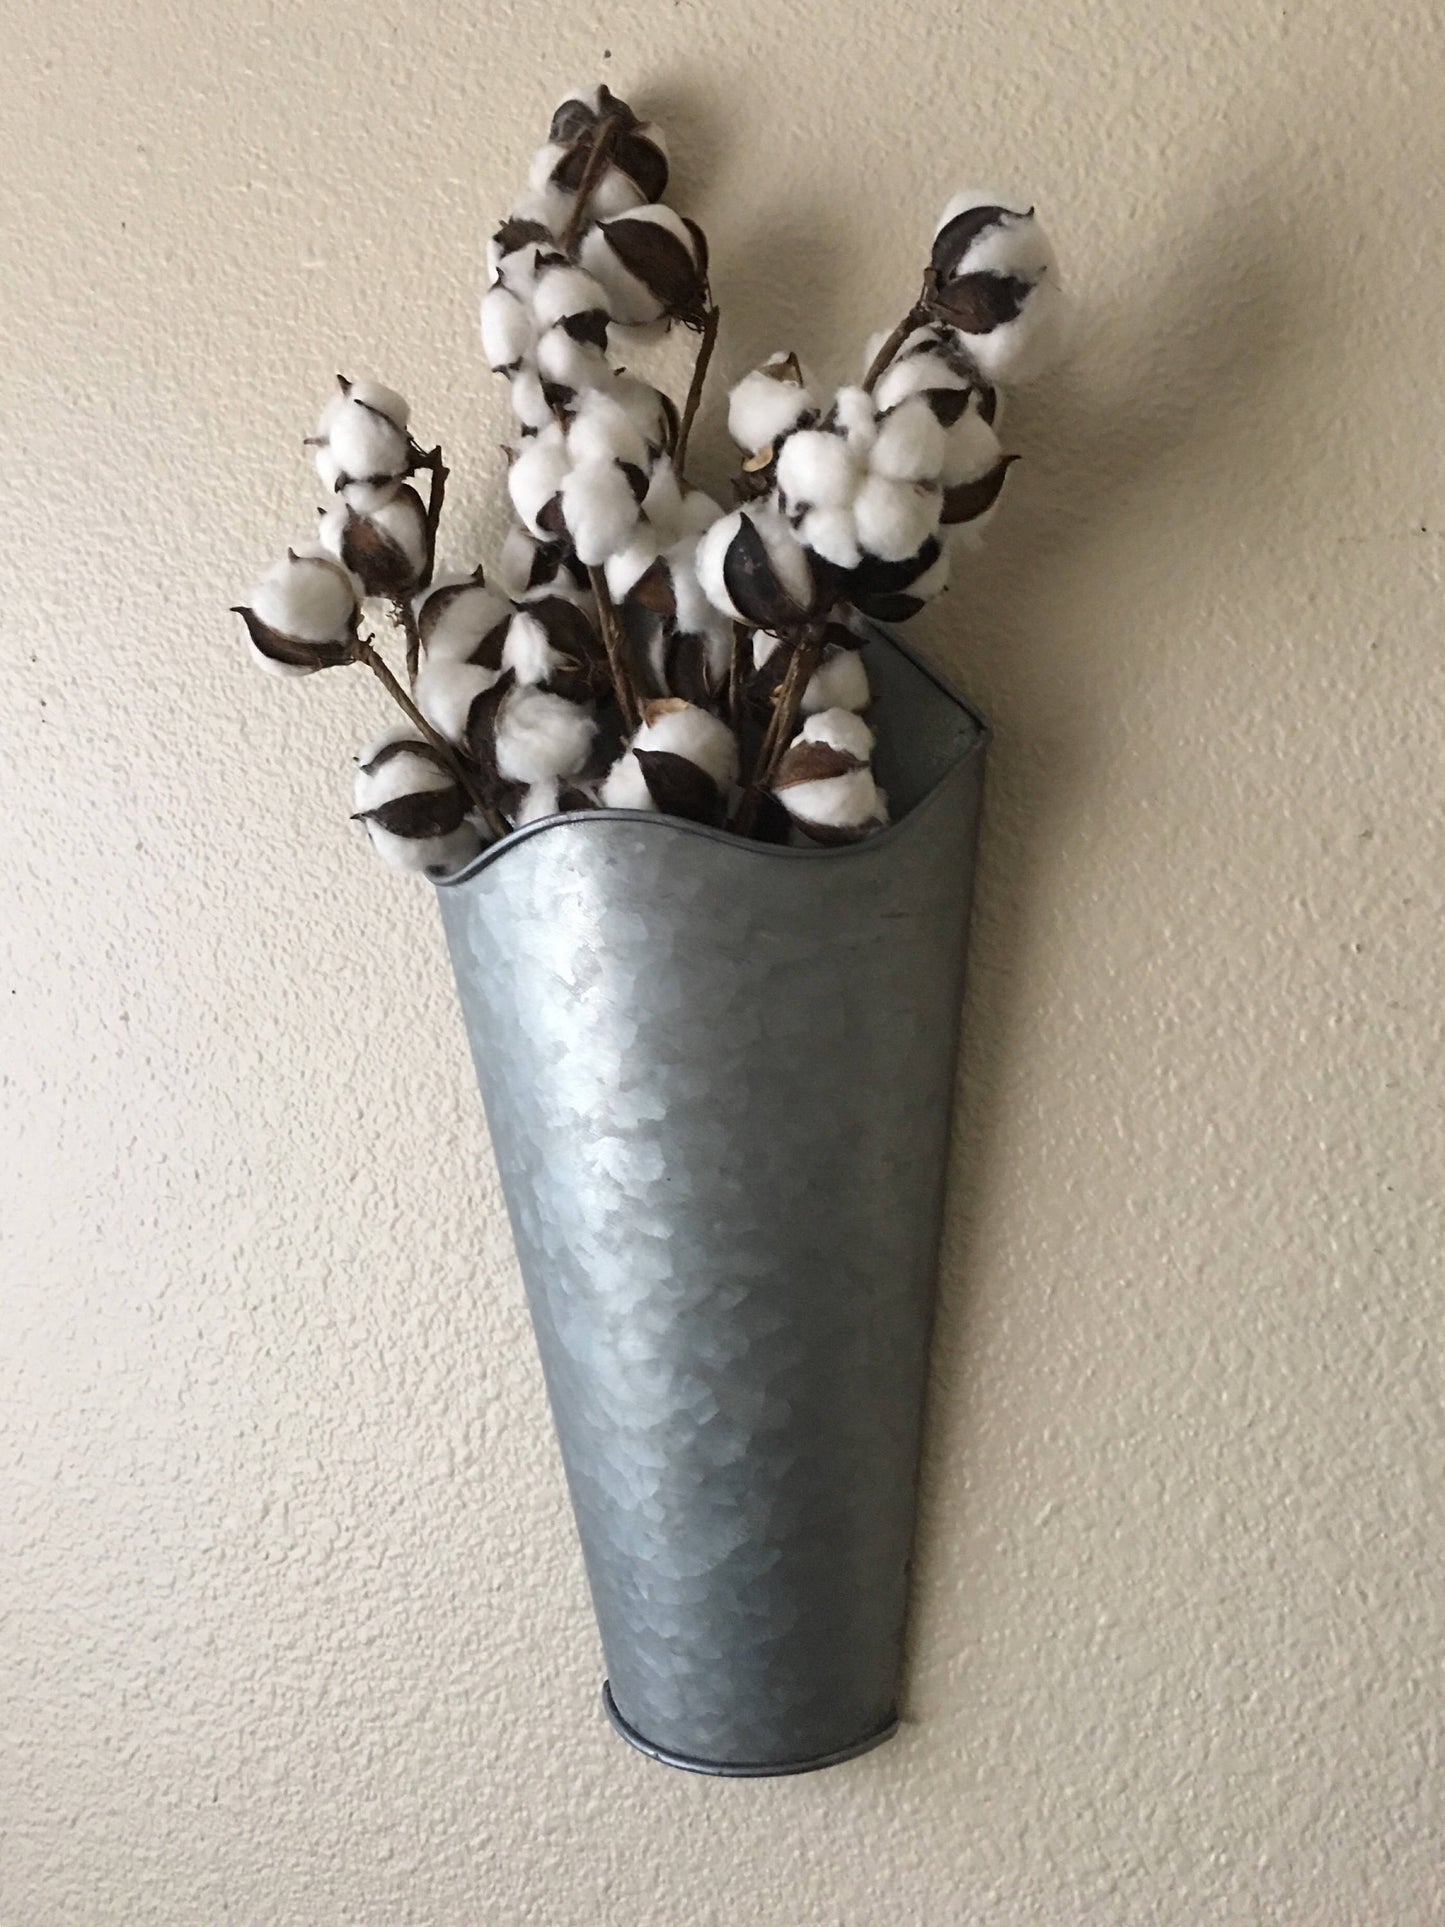 Wall Vase with Cotton Stems, Cotton Stem Decor, Rustic Farmhouse Wall Decor, Country Wall Decor, Rustic Decor, Home Decor, Farmhouse